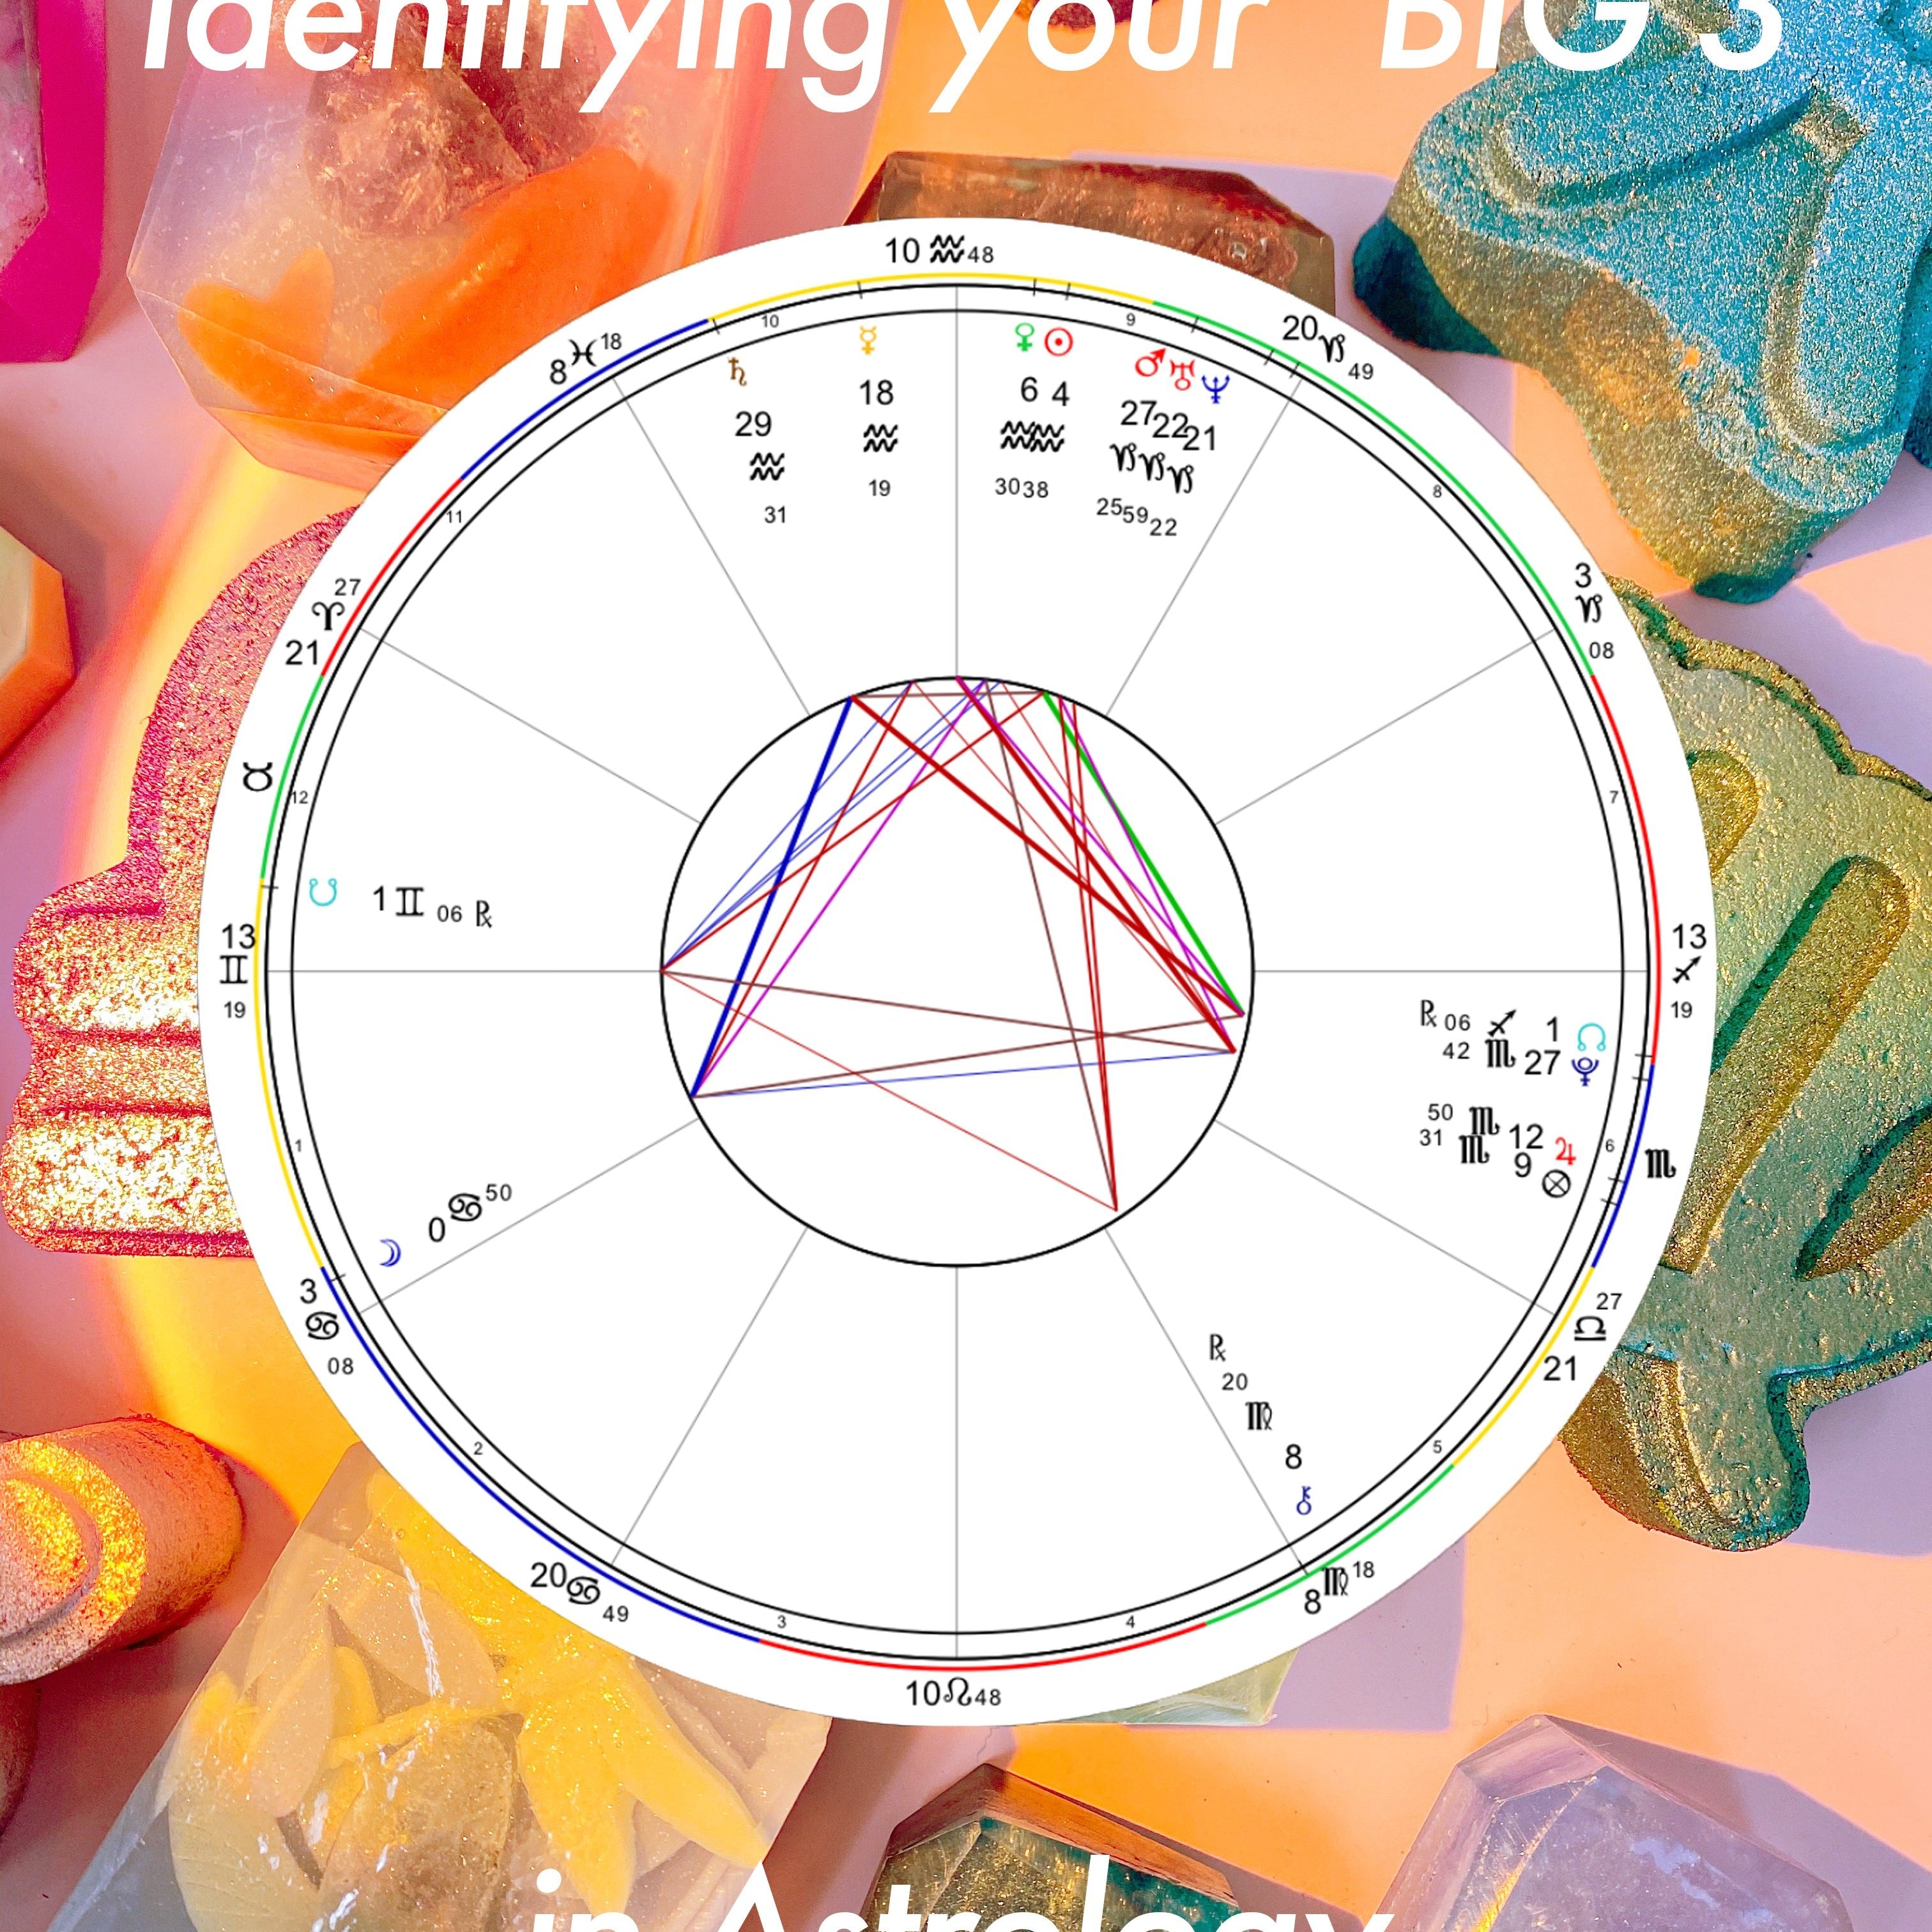 Identifying your "BIG 3" in Astrology | Crystal Bar Soap